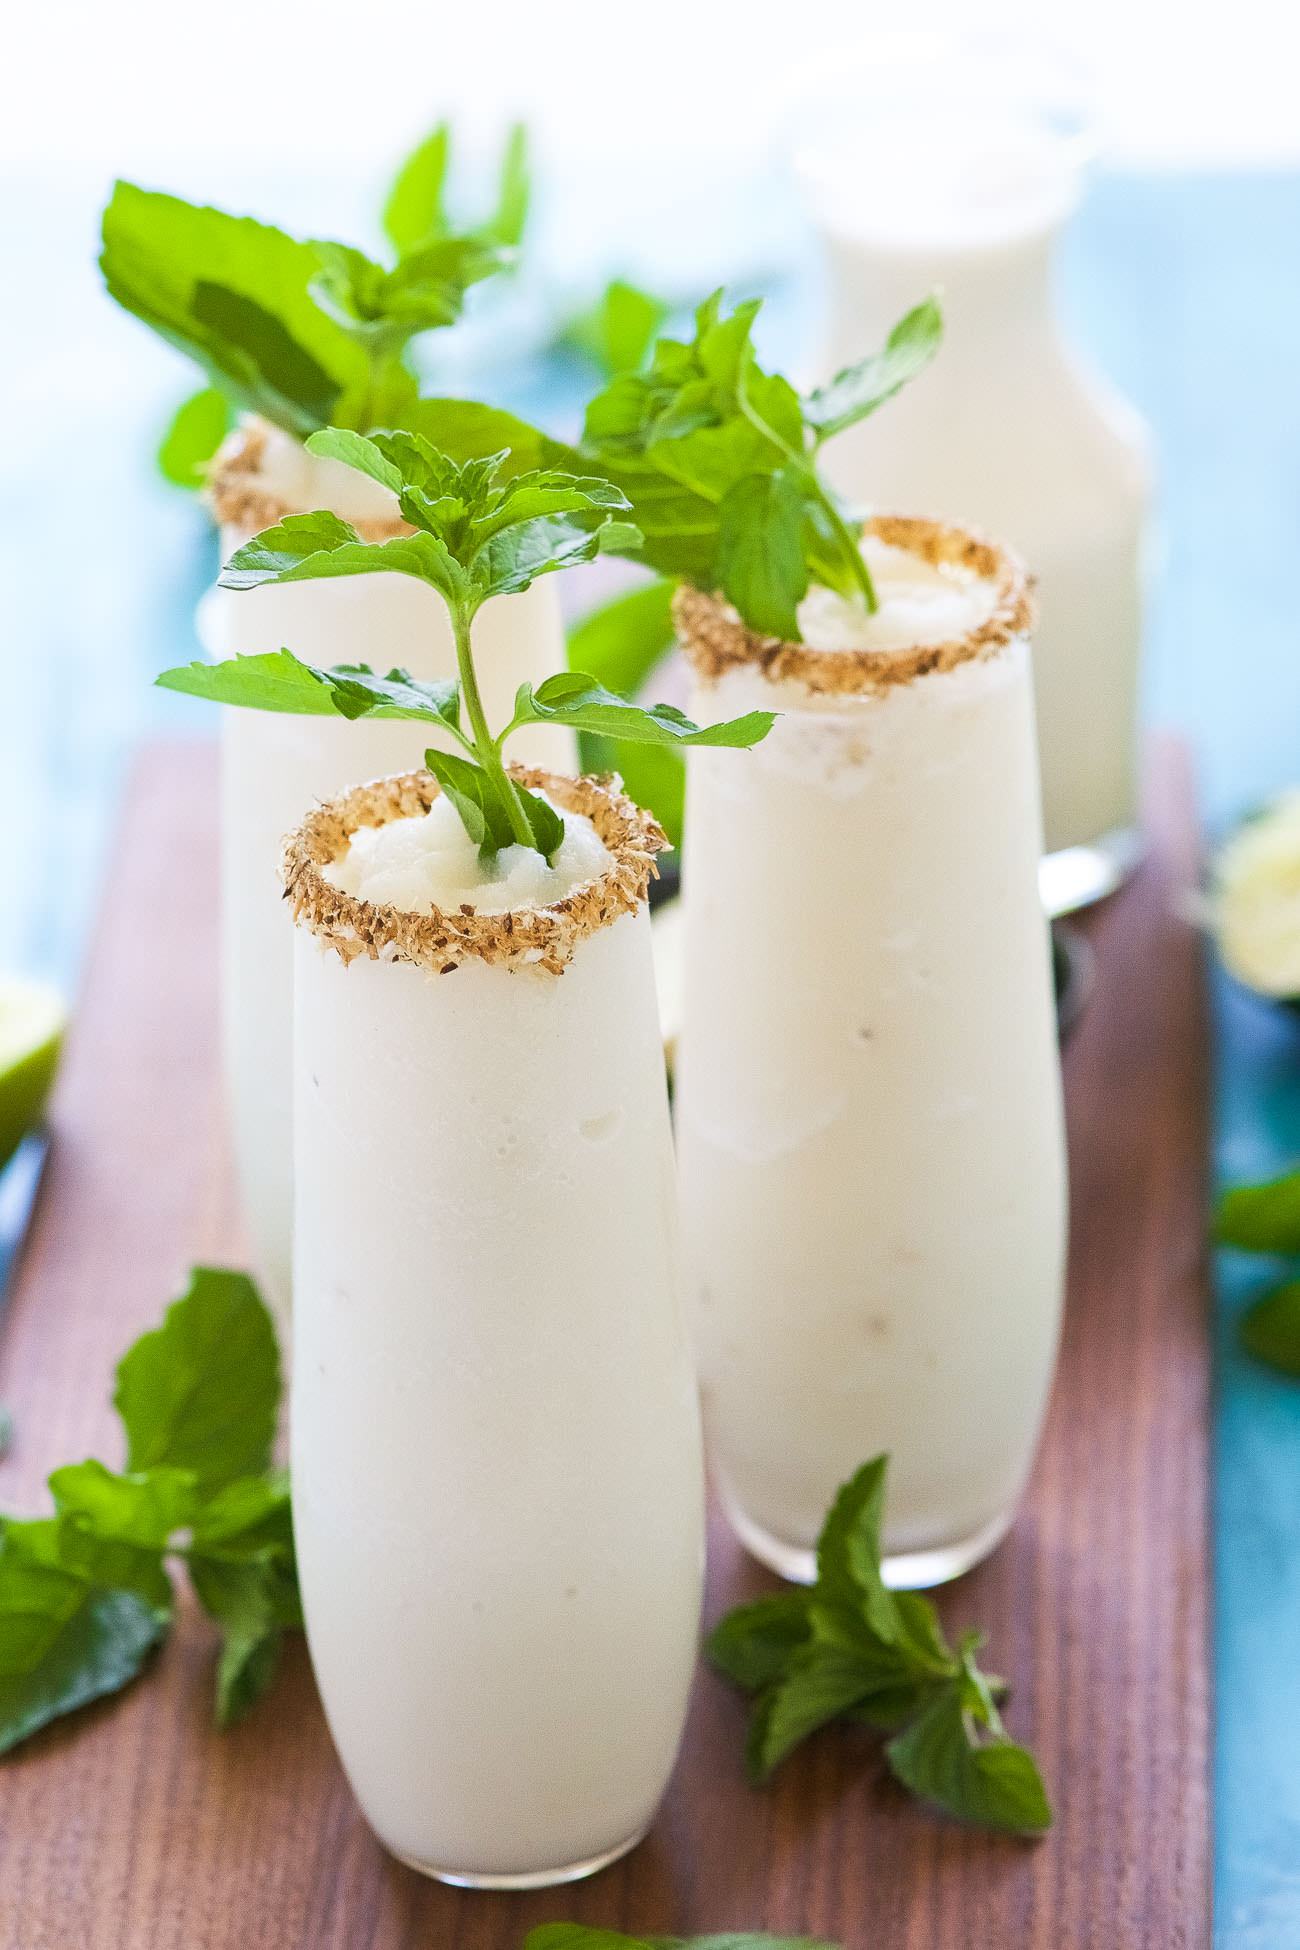 This Toasted Frozen Coconut Mojito is a summer must have! Made lighter with fresh lime juice, a mint simple syrup, and then blended with coconut milk for a refreshing cocktail that you won't have trouble asking for seconds!